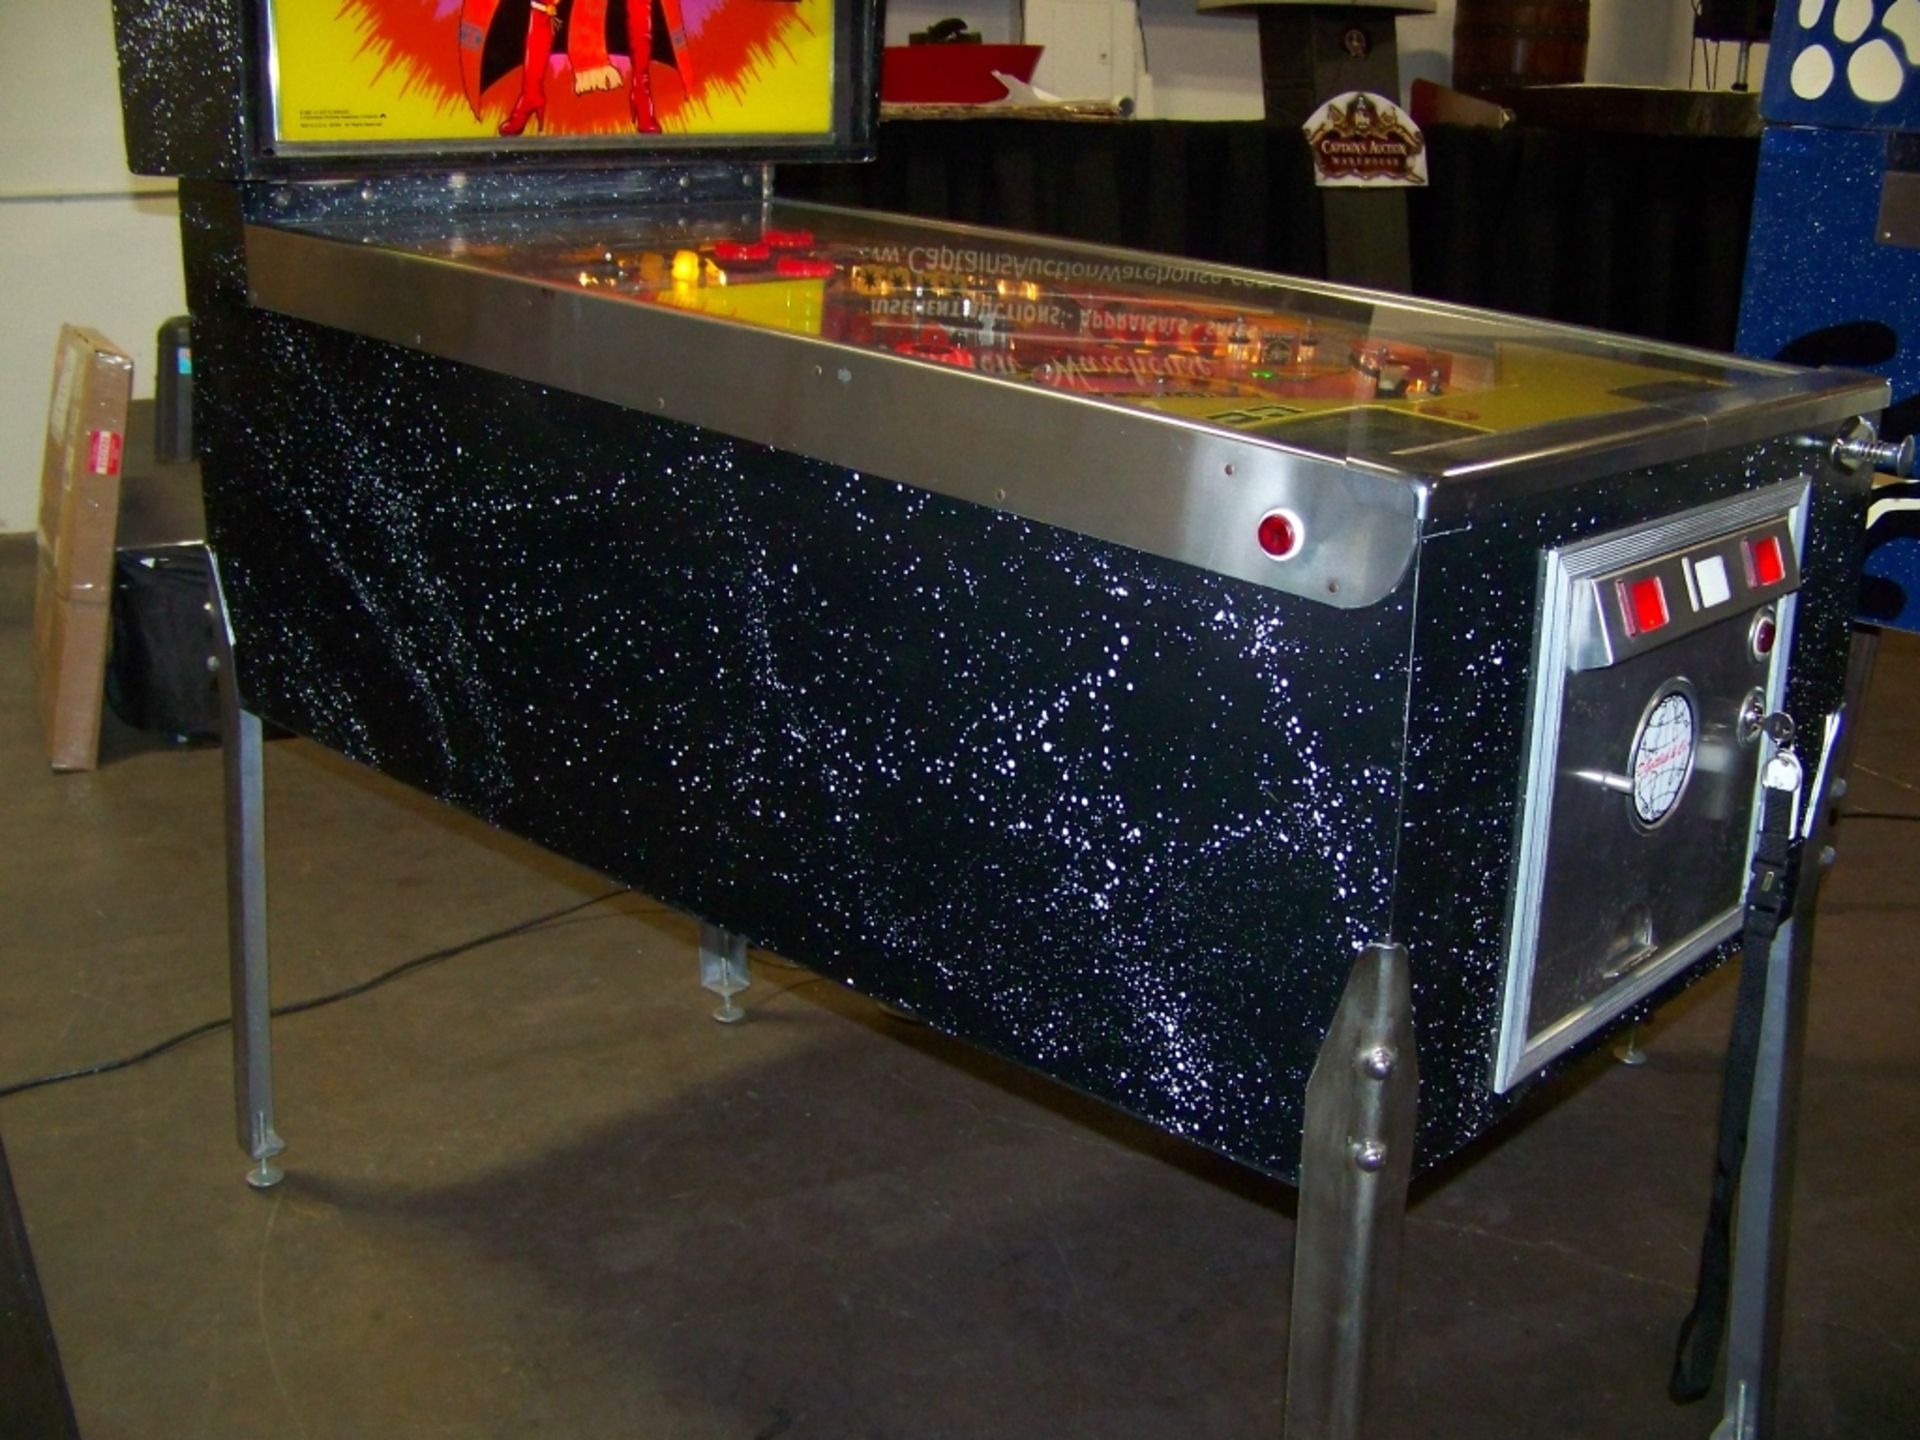 ECLIPSE PINBALL MACHINE RARE GOTTLIEB TITLE 1982 Item is in used condition. Evidence of wear and - Image 3 of 11